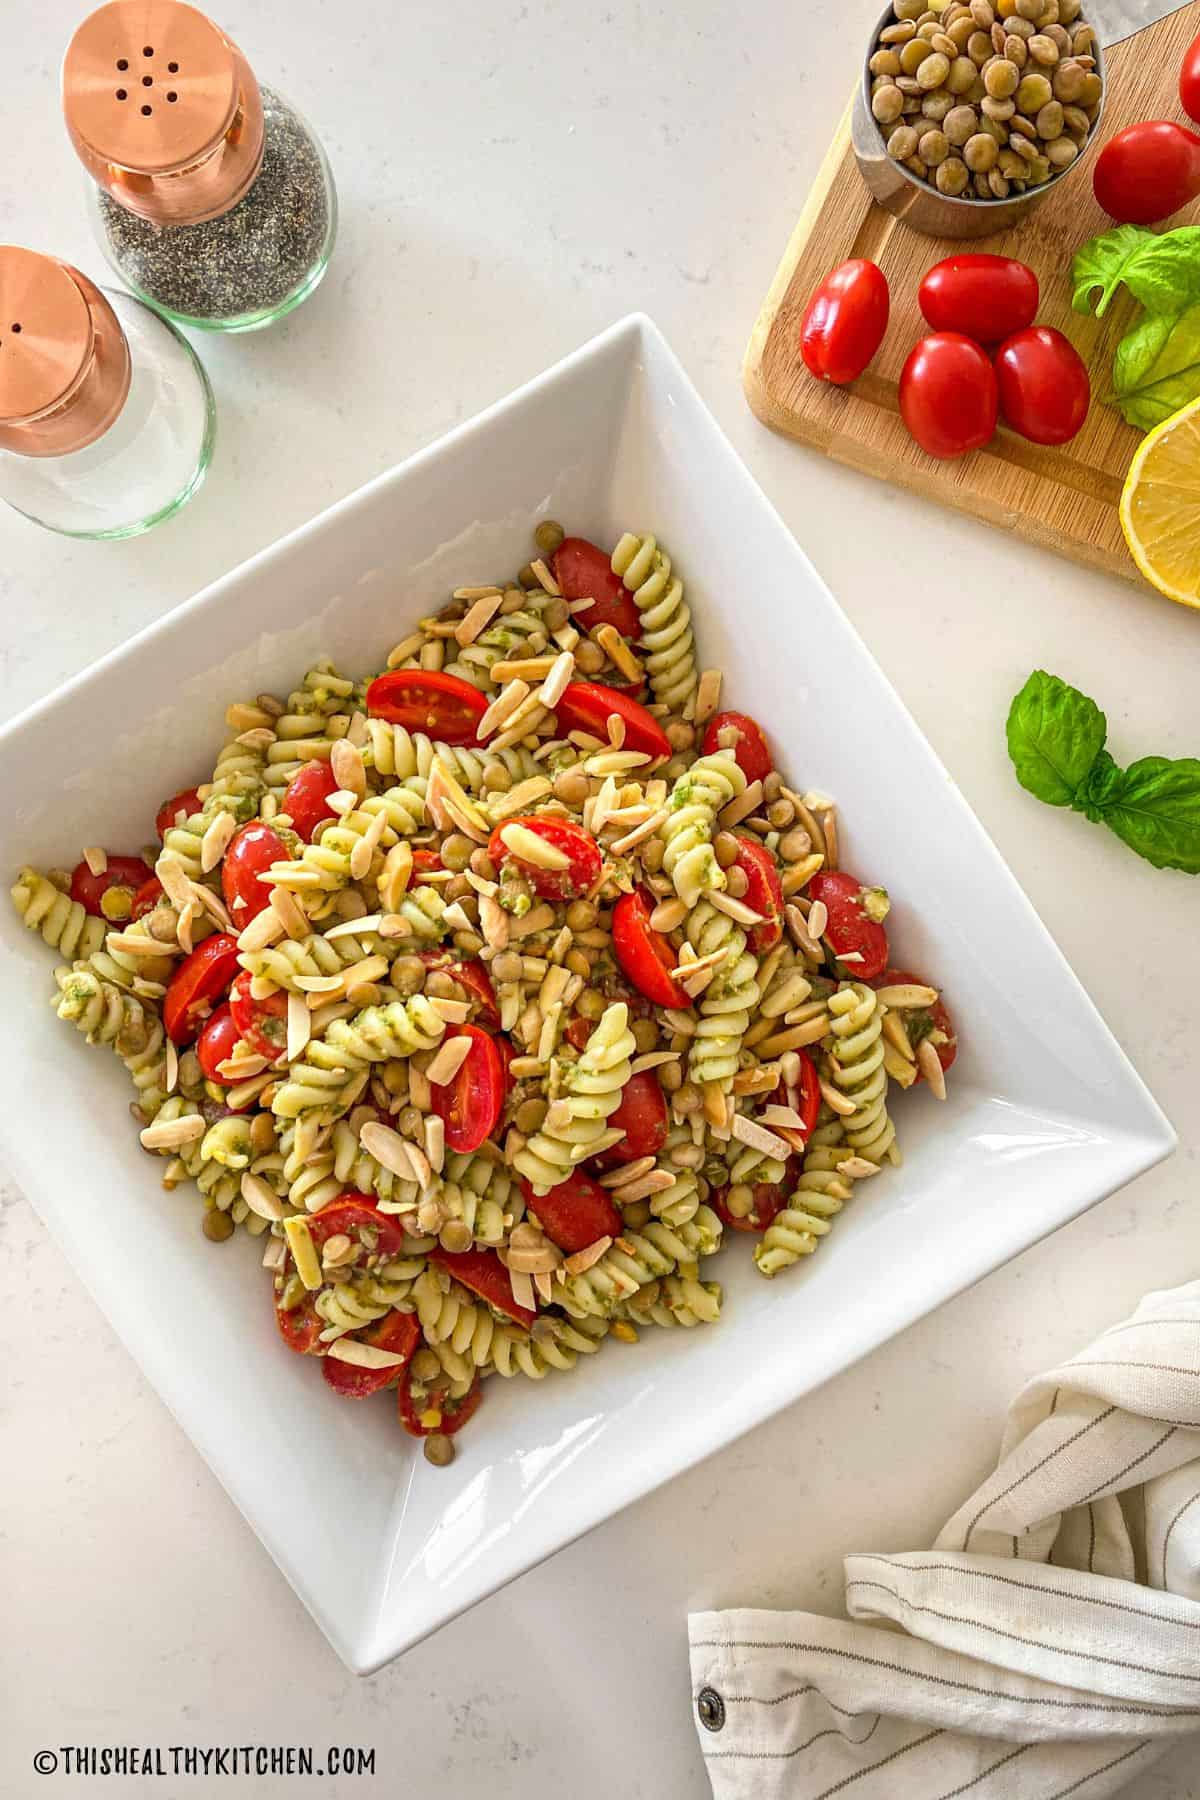 White serving dish with pasta salad with tomatoes, basil, and slivered almonds.